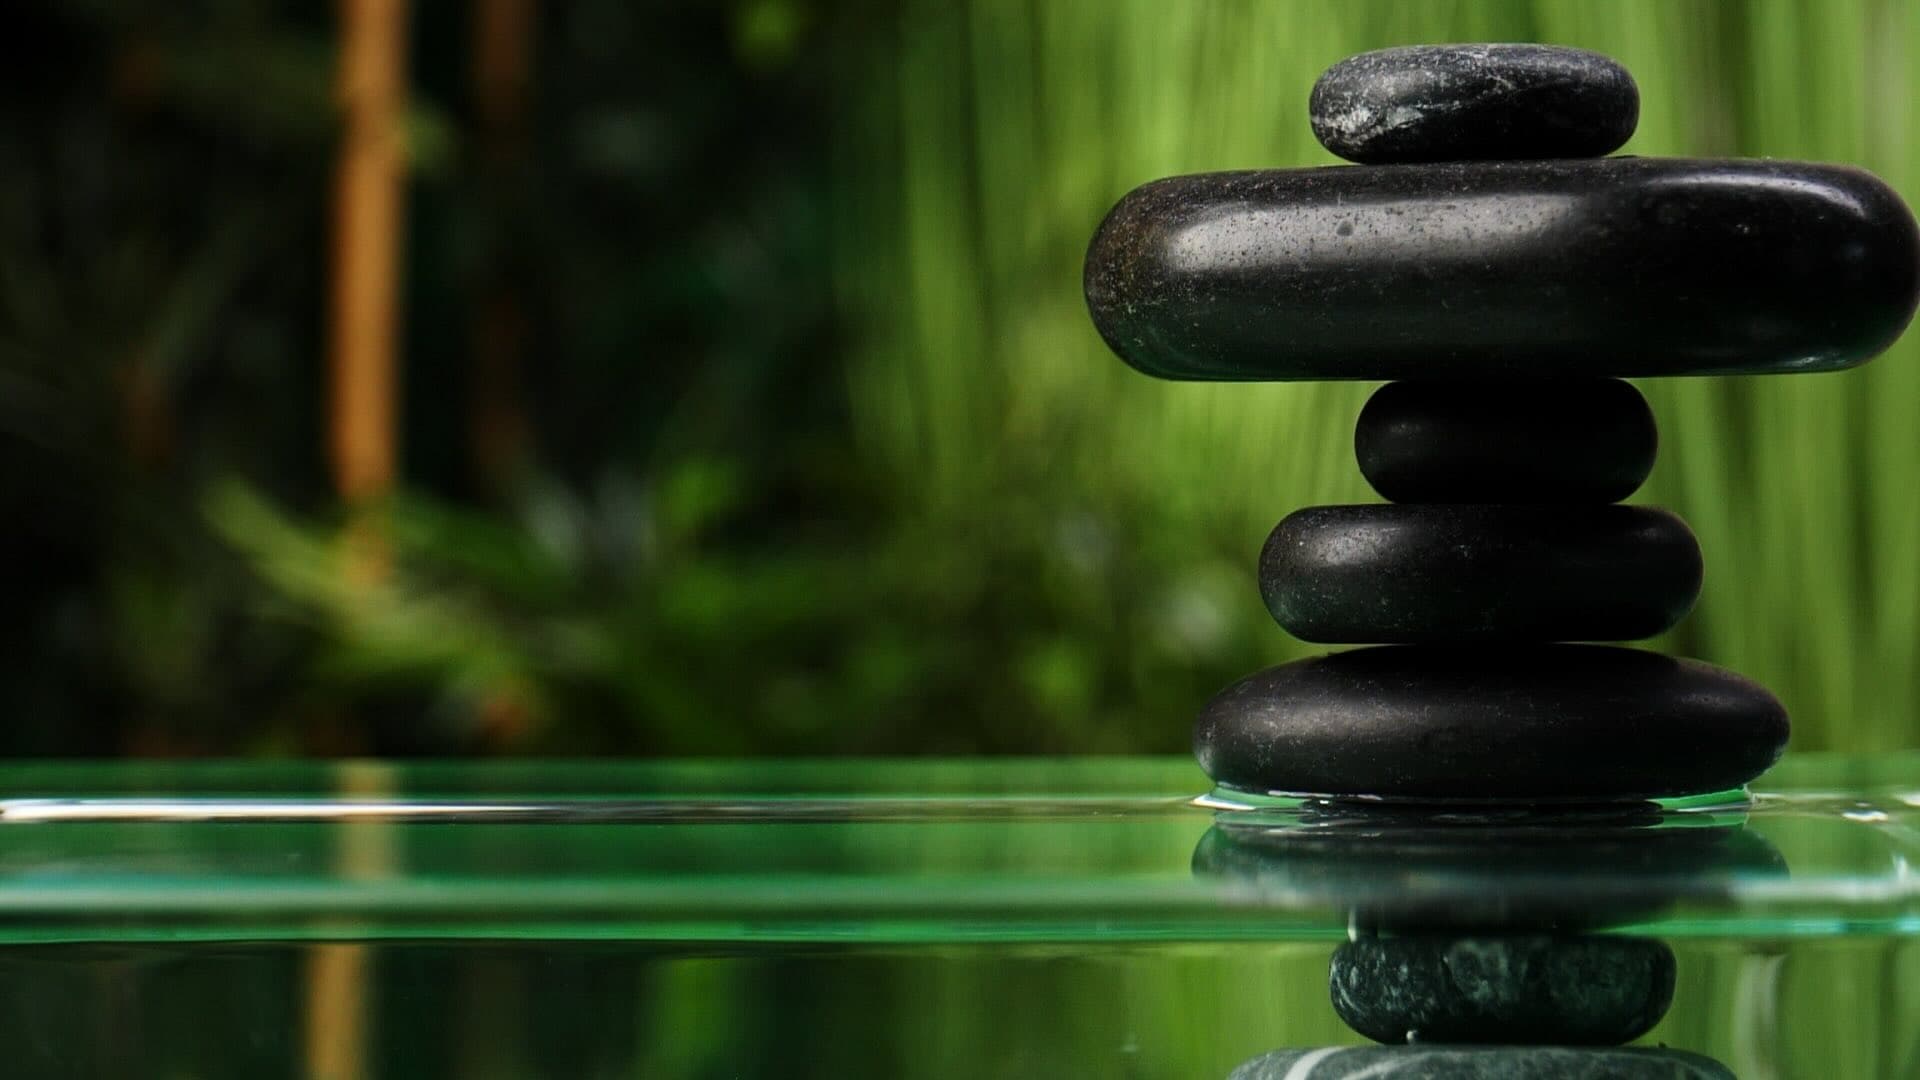 A few flat black stones stacked on top of each other, with a drop of water dropping into the water, creating a ripple